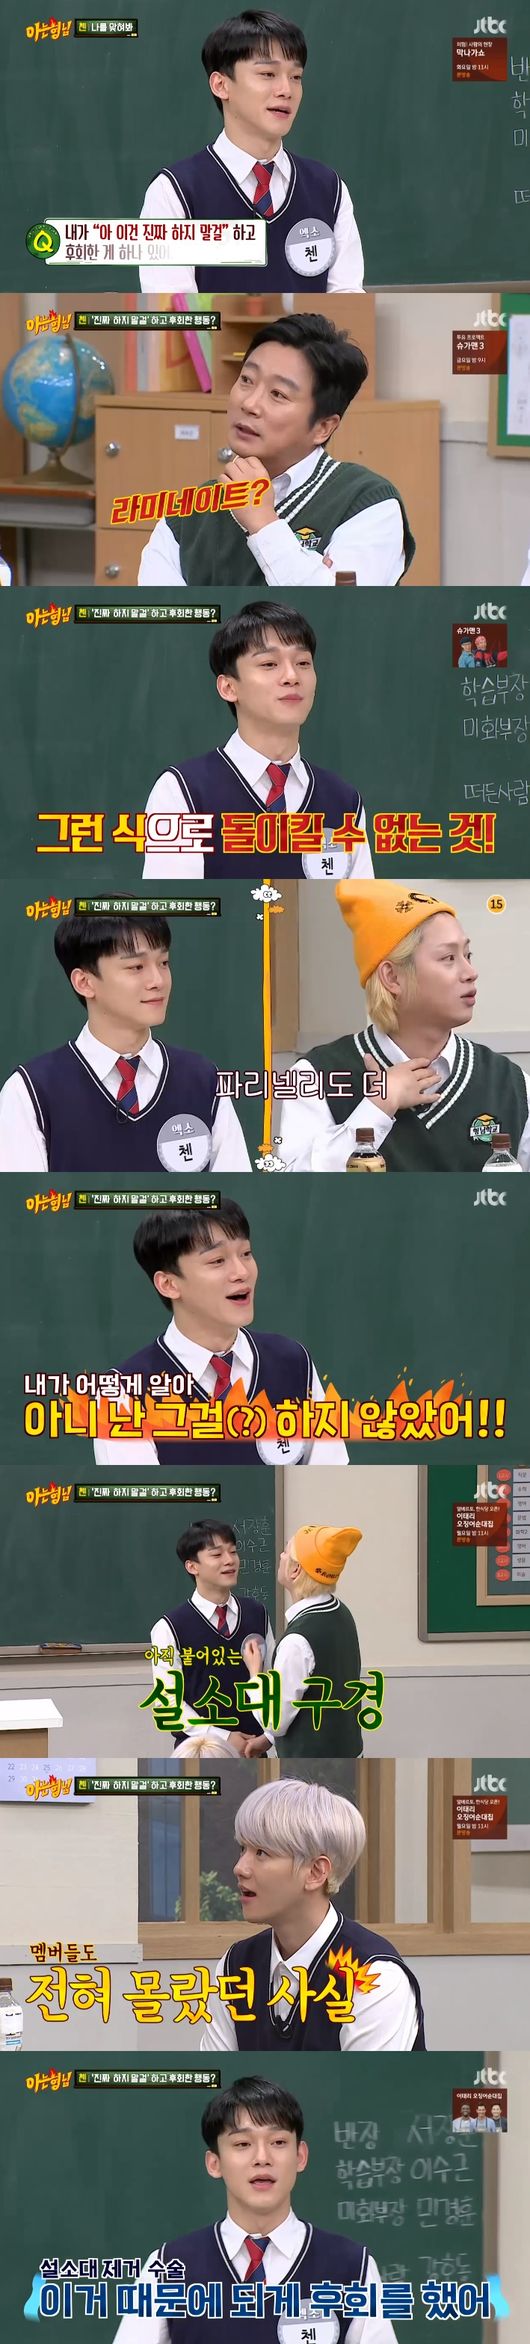 Group EXO Chen has undergone surgery to remove the diarrheal zone, Confessions have said.In the JTBC entertainment Men on a Mission broadcasted on the 7th, Chen was the first to show Confessions about Snow Platoon Surgery that members do not know.Chen said he did not really do it and regretted his behavior.Lee Soo-geun laughed when he said laminate and asked for a hint, Chen said, I wanted to sing too well in high school.It can not be reversed like a laminate. Kim Hee-chul said, Did not you operate somewhere because you wanted to sing well, said Chen, embarrassed.Kim Hee-chul then answered, Is that under the tongue a removal surgery? And EXO members were surprised that they did not know really.Chen said, I regretted this a lot. I had a hard pronunciation. I thought I could sing well.But it hurt. I couldnt swallow. And it had nothing to do with my singing skills. But it didnt sound like fresh.Lee Soo-geun laughed, saying, I will be a trot later because I am a hrrrrrrrrrrrrrrrrrrrrrrrrrrrrrrrrrrrrrrrrrrrrrrrrrrrrrrrrrrrrrrrKai asked, My mother was very embarrassed by her neighbors. The water is water. But she said she gave something.Baek Hyun said, I put my shit in front of the door. Kim Hee-chul was embarrassed. Kim Young-chul said, I am an employee and I will take care of EXO sign cd.Kai said, I am really sorry for my house, and I gave my mom an EXO CD.I was happy to hear about EXO, saying that I was just okay to see my picture and see if I could check it. Suho then said, What is my favorite modifier? The answer was Compassion Free Pass Award.Suho said, I was very proud and good.Knowing Bros Screen Capture